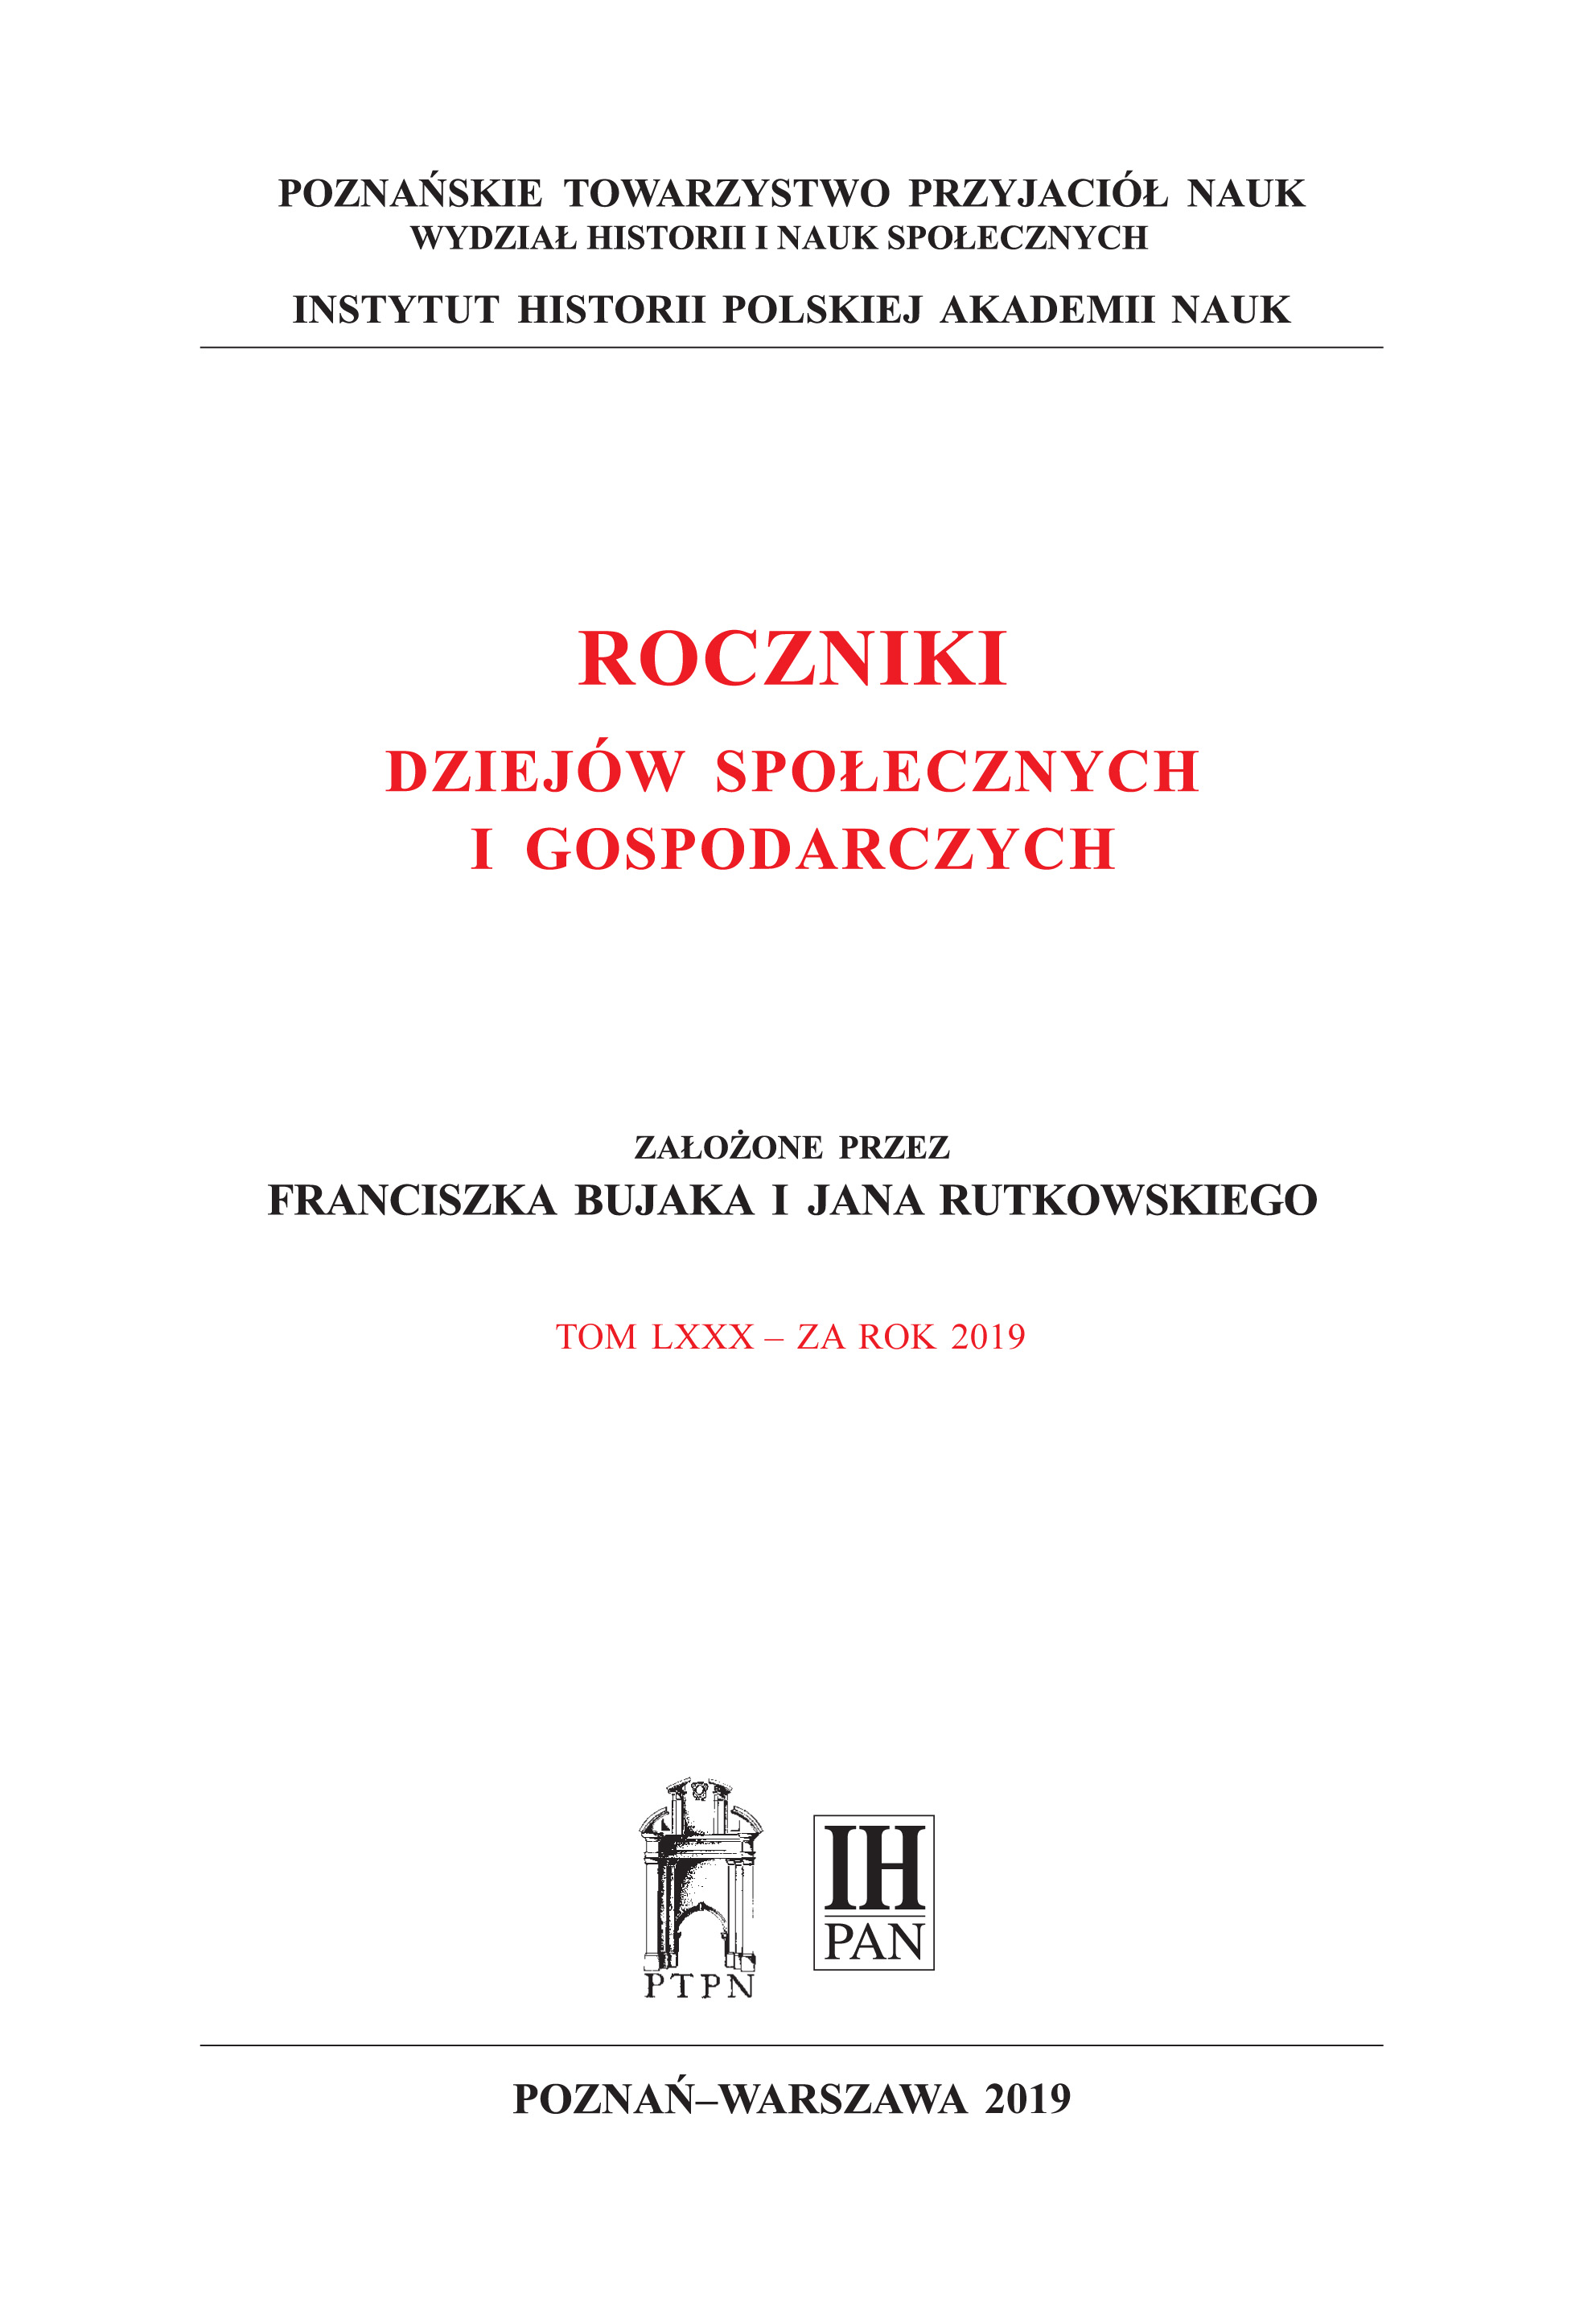 Economic arguments in the Polish thought on peace. John Bloch’s views against the background of the Polish thought on peace